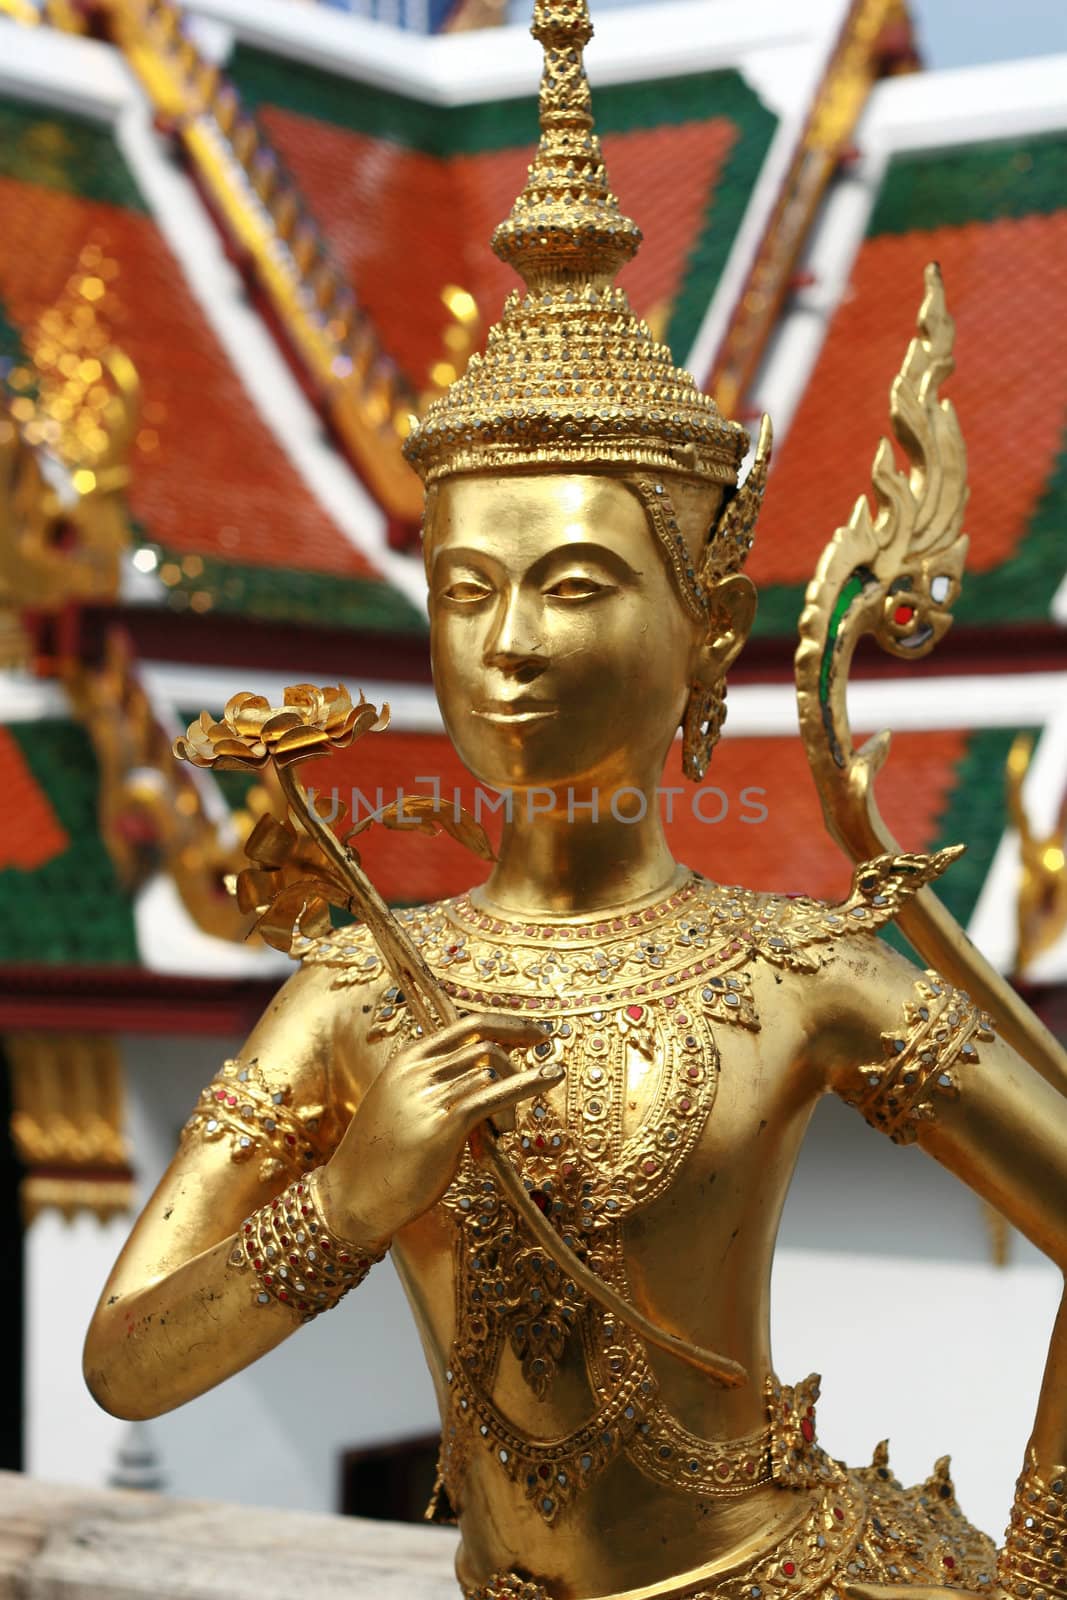 Statue in Grand Palace, Thailand